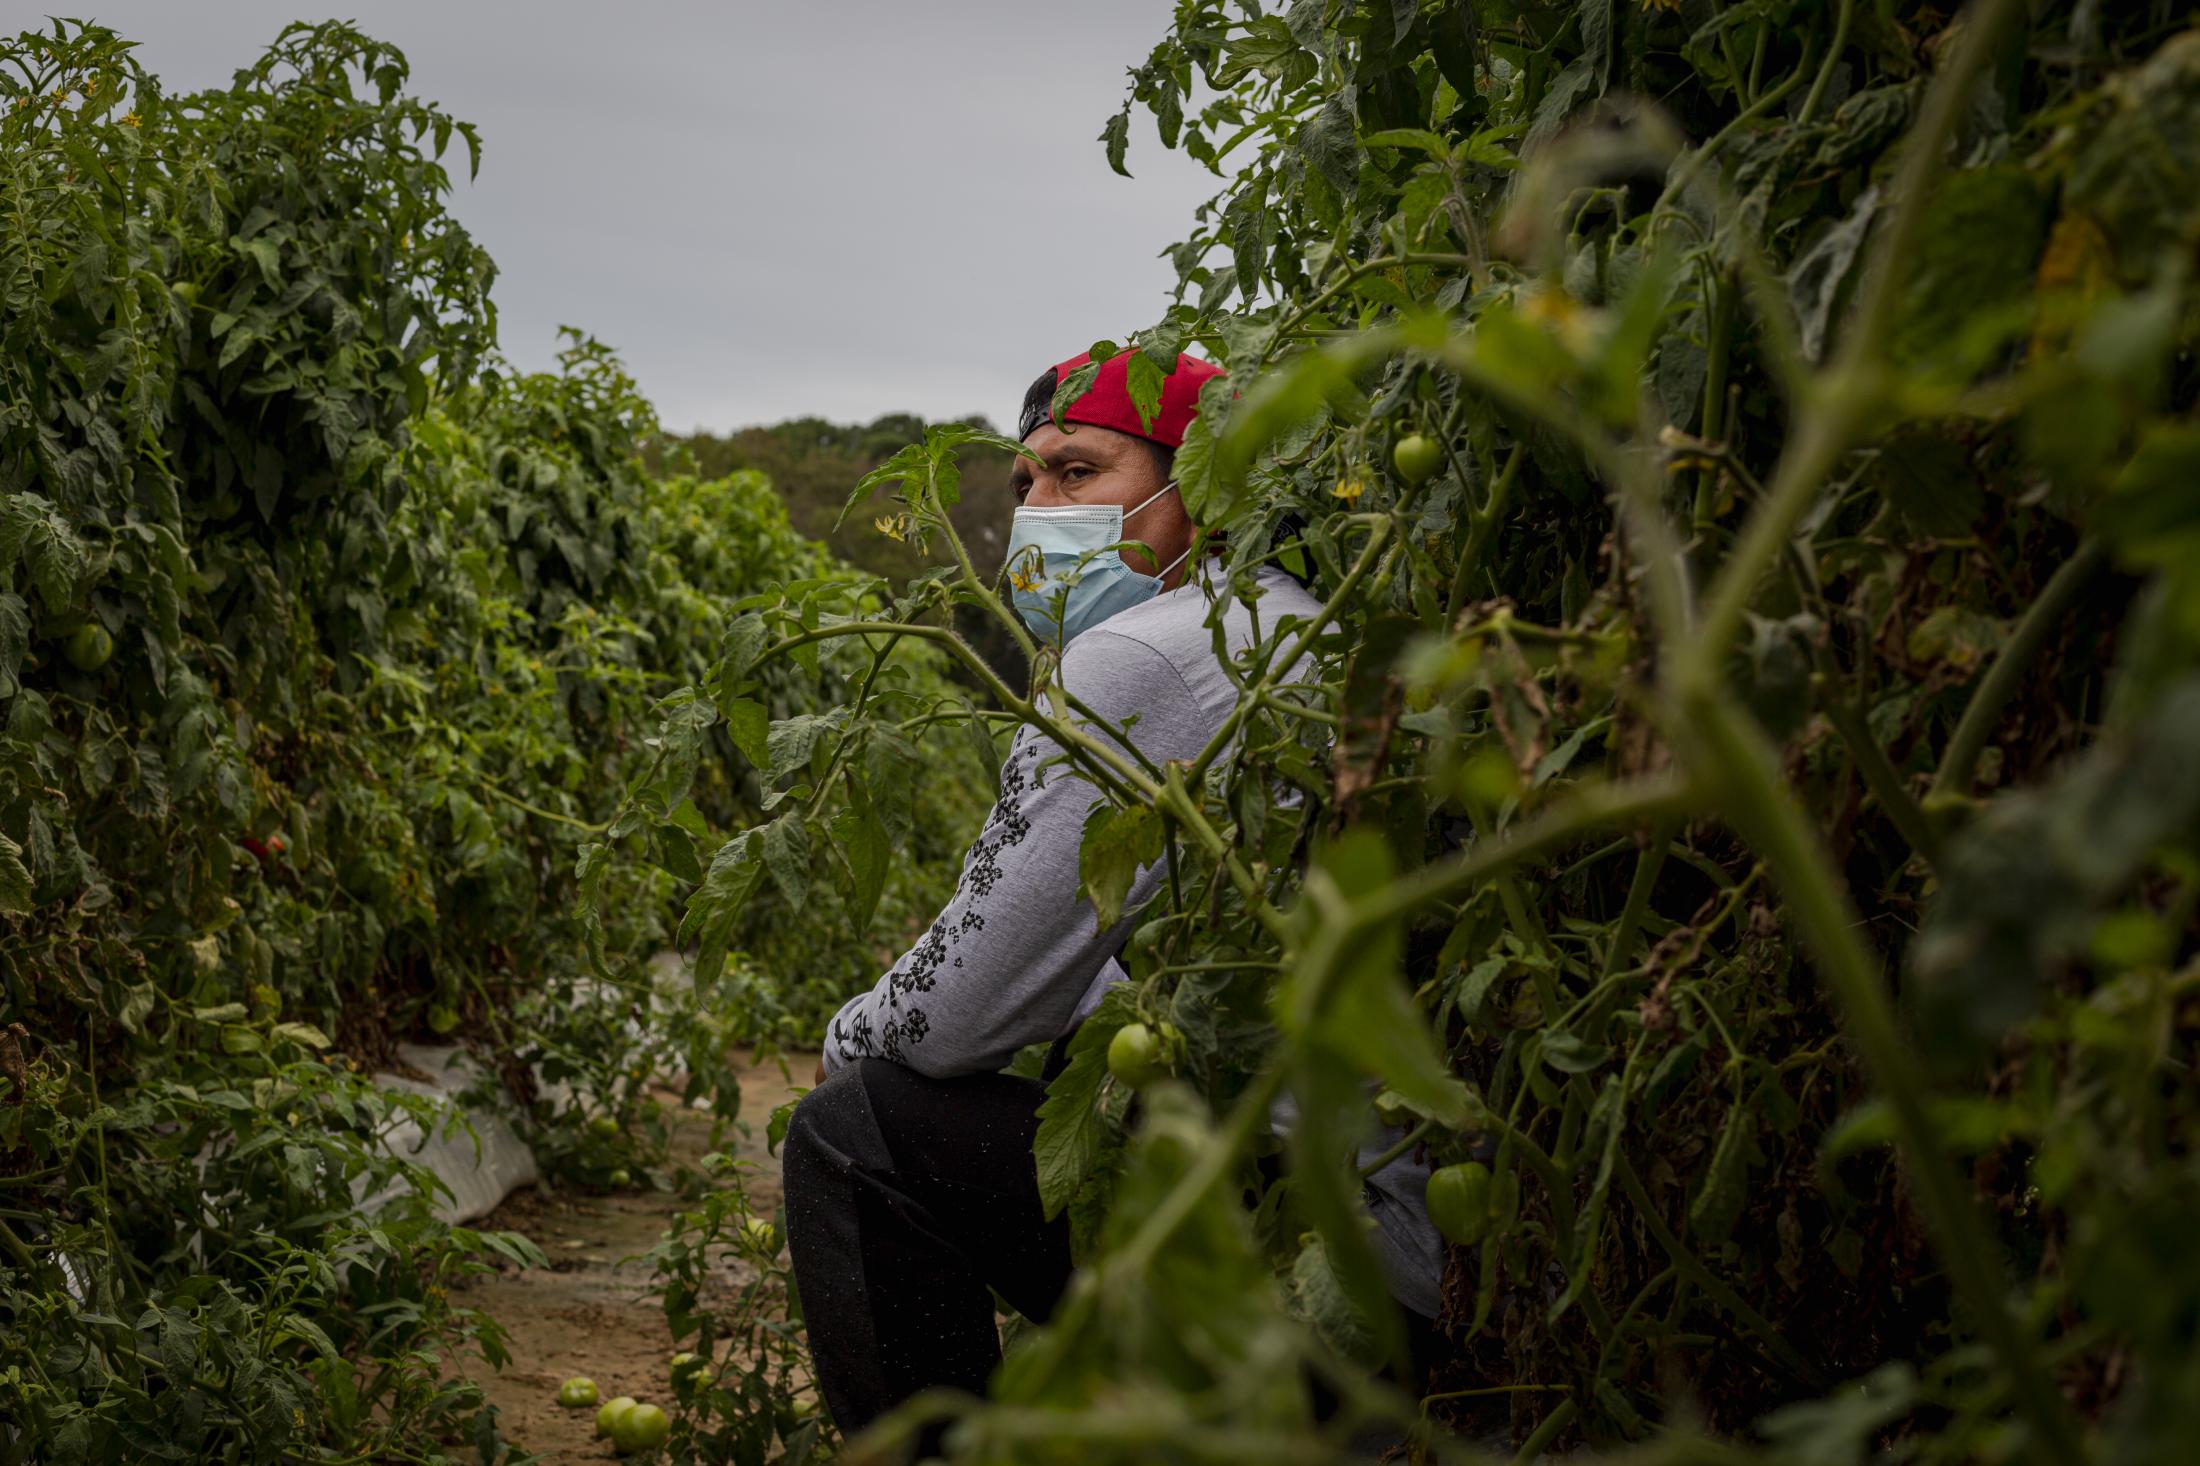 CHERITON, VA &ndash; September 26, 2020: Seasonal farmworker poses for a portrait in one of the many tomato fields in the remote Eastern Shore of Virginia. Seasonal farmworkers are brought by the thousands to toil in the tomato fields, since the start of the covid-19 pandemic, their conditions have worsened. Photo: Carlos Bernate for The New York Times